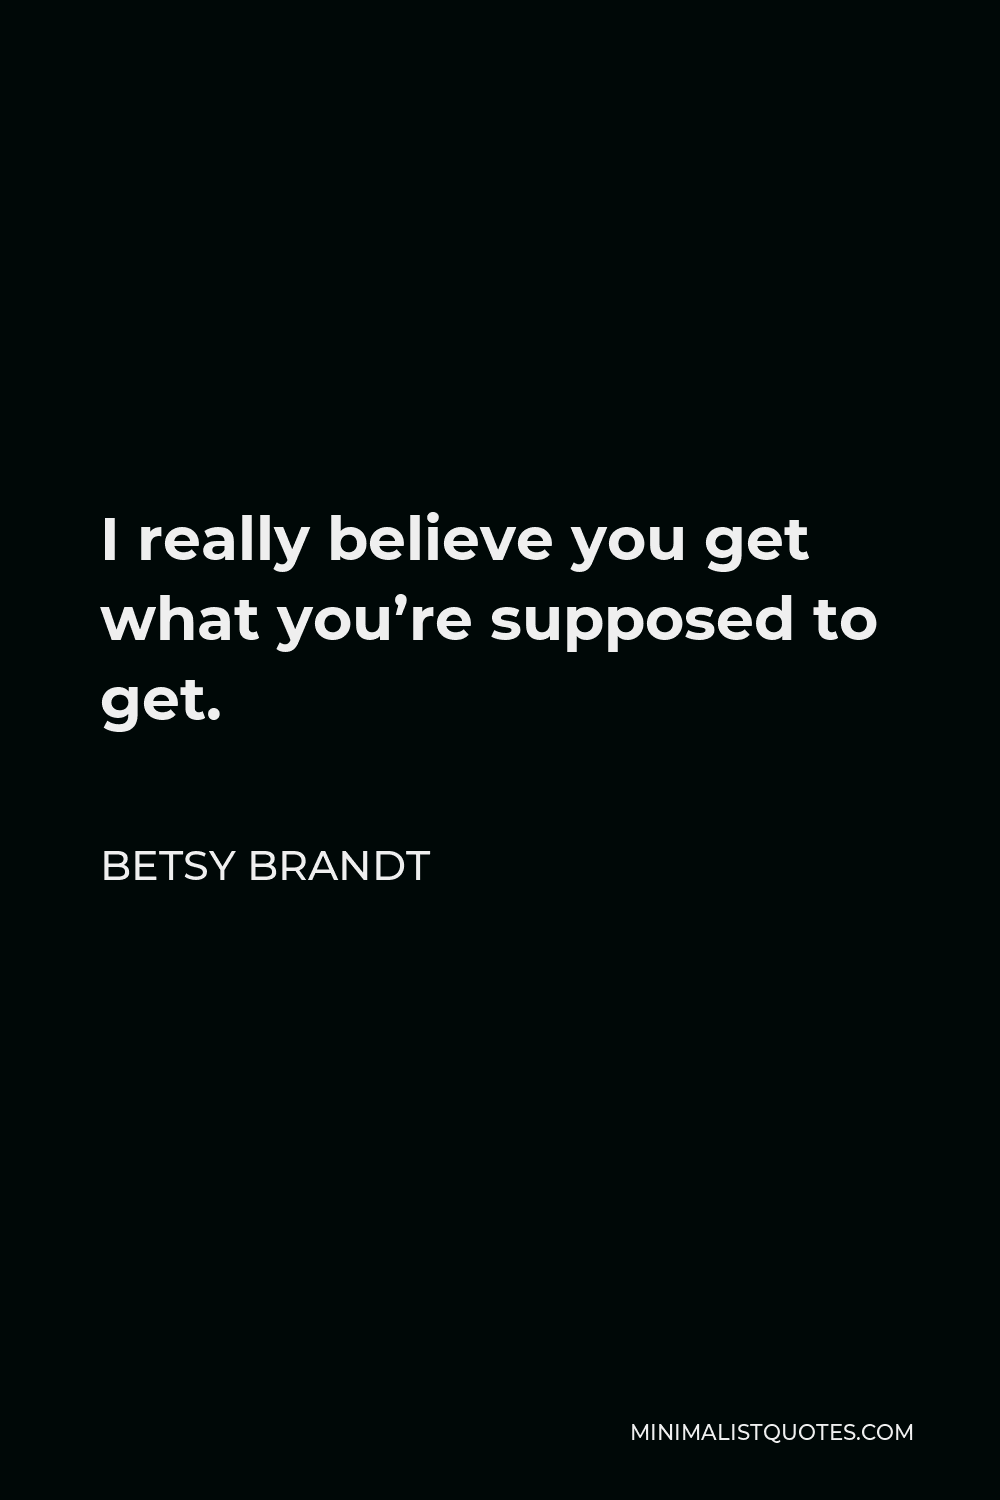 Betsy Brandt Quote - I really believe you get what you’re supposed to get.